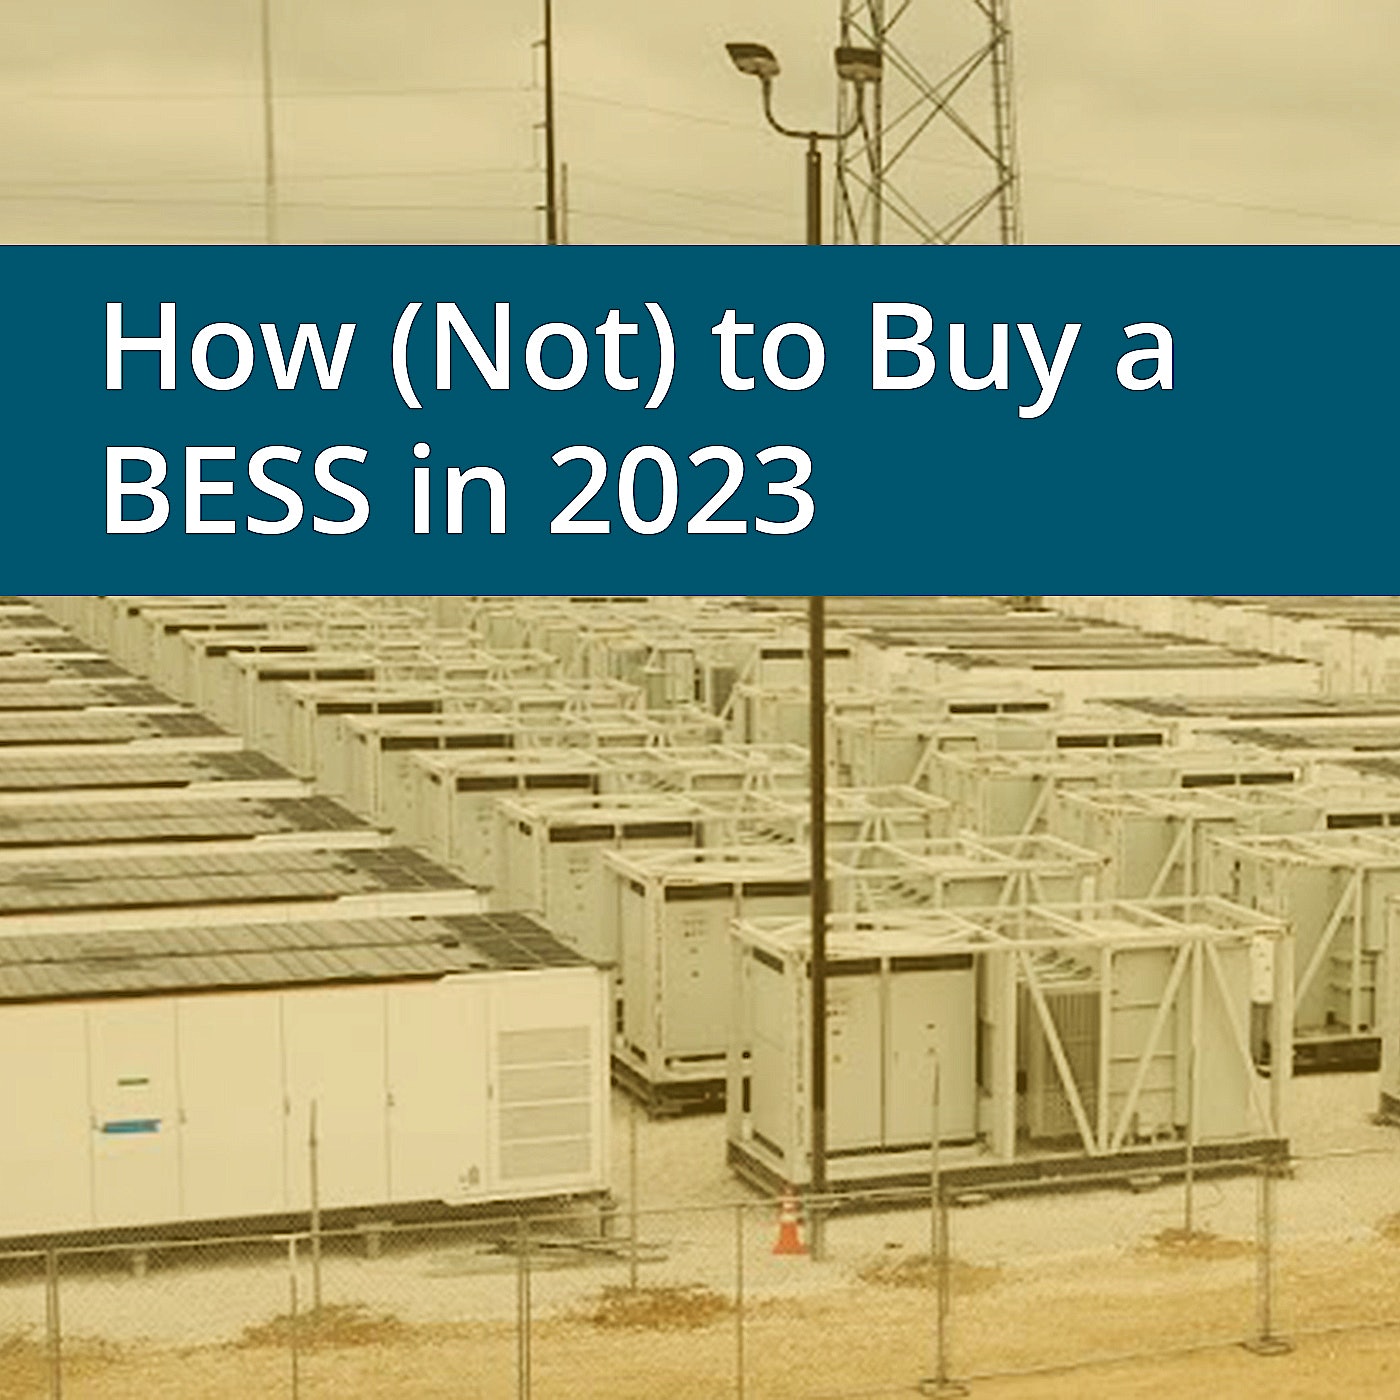 How (Not) to Buy a BESS in 2023